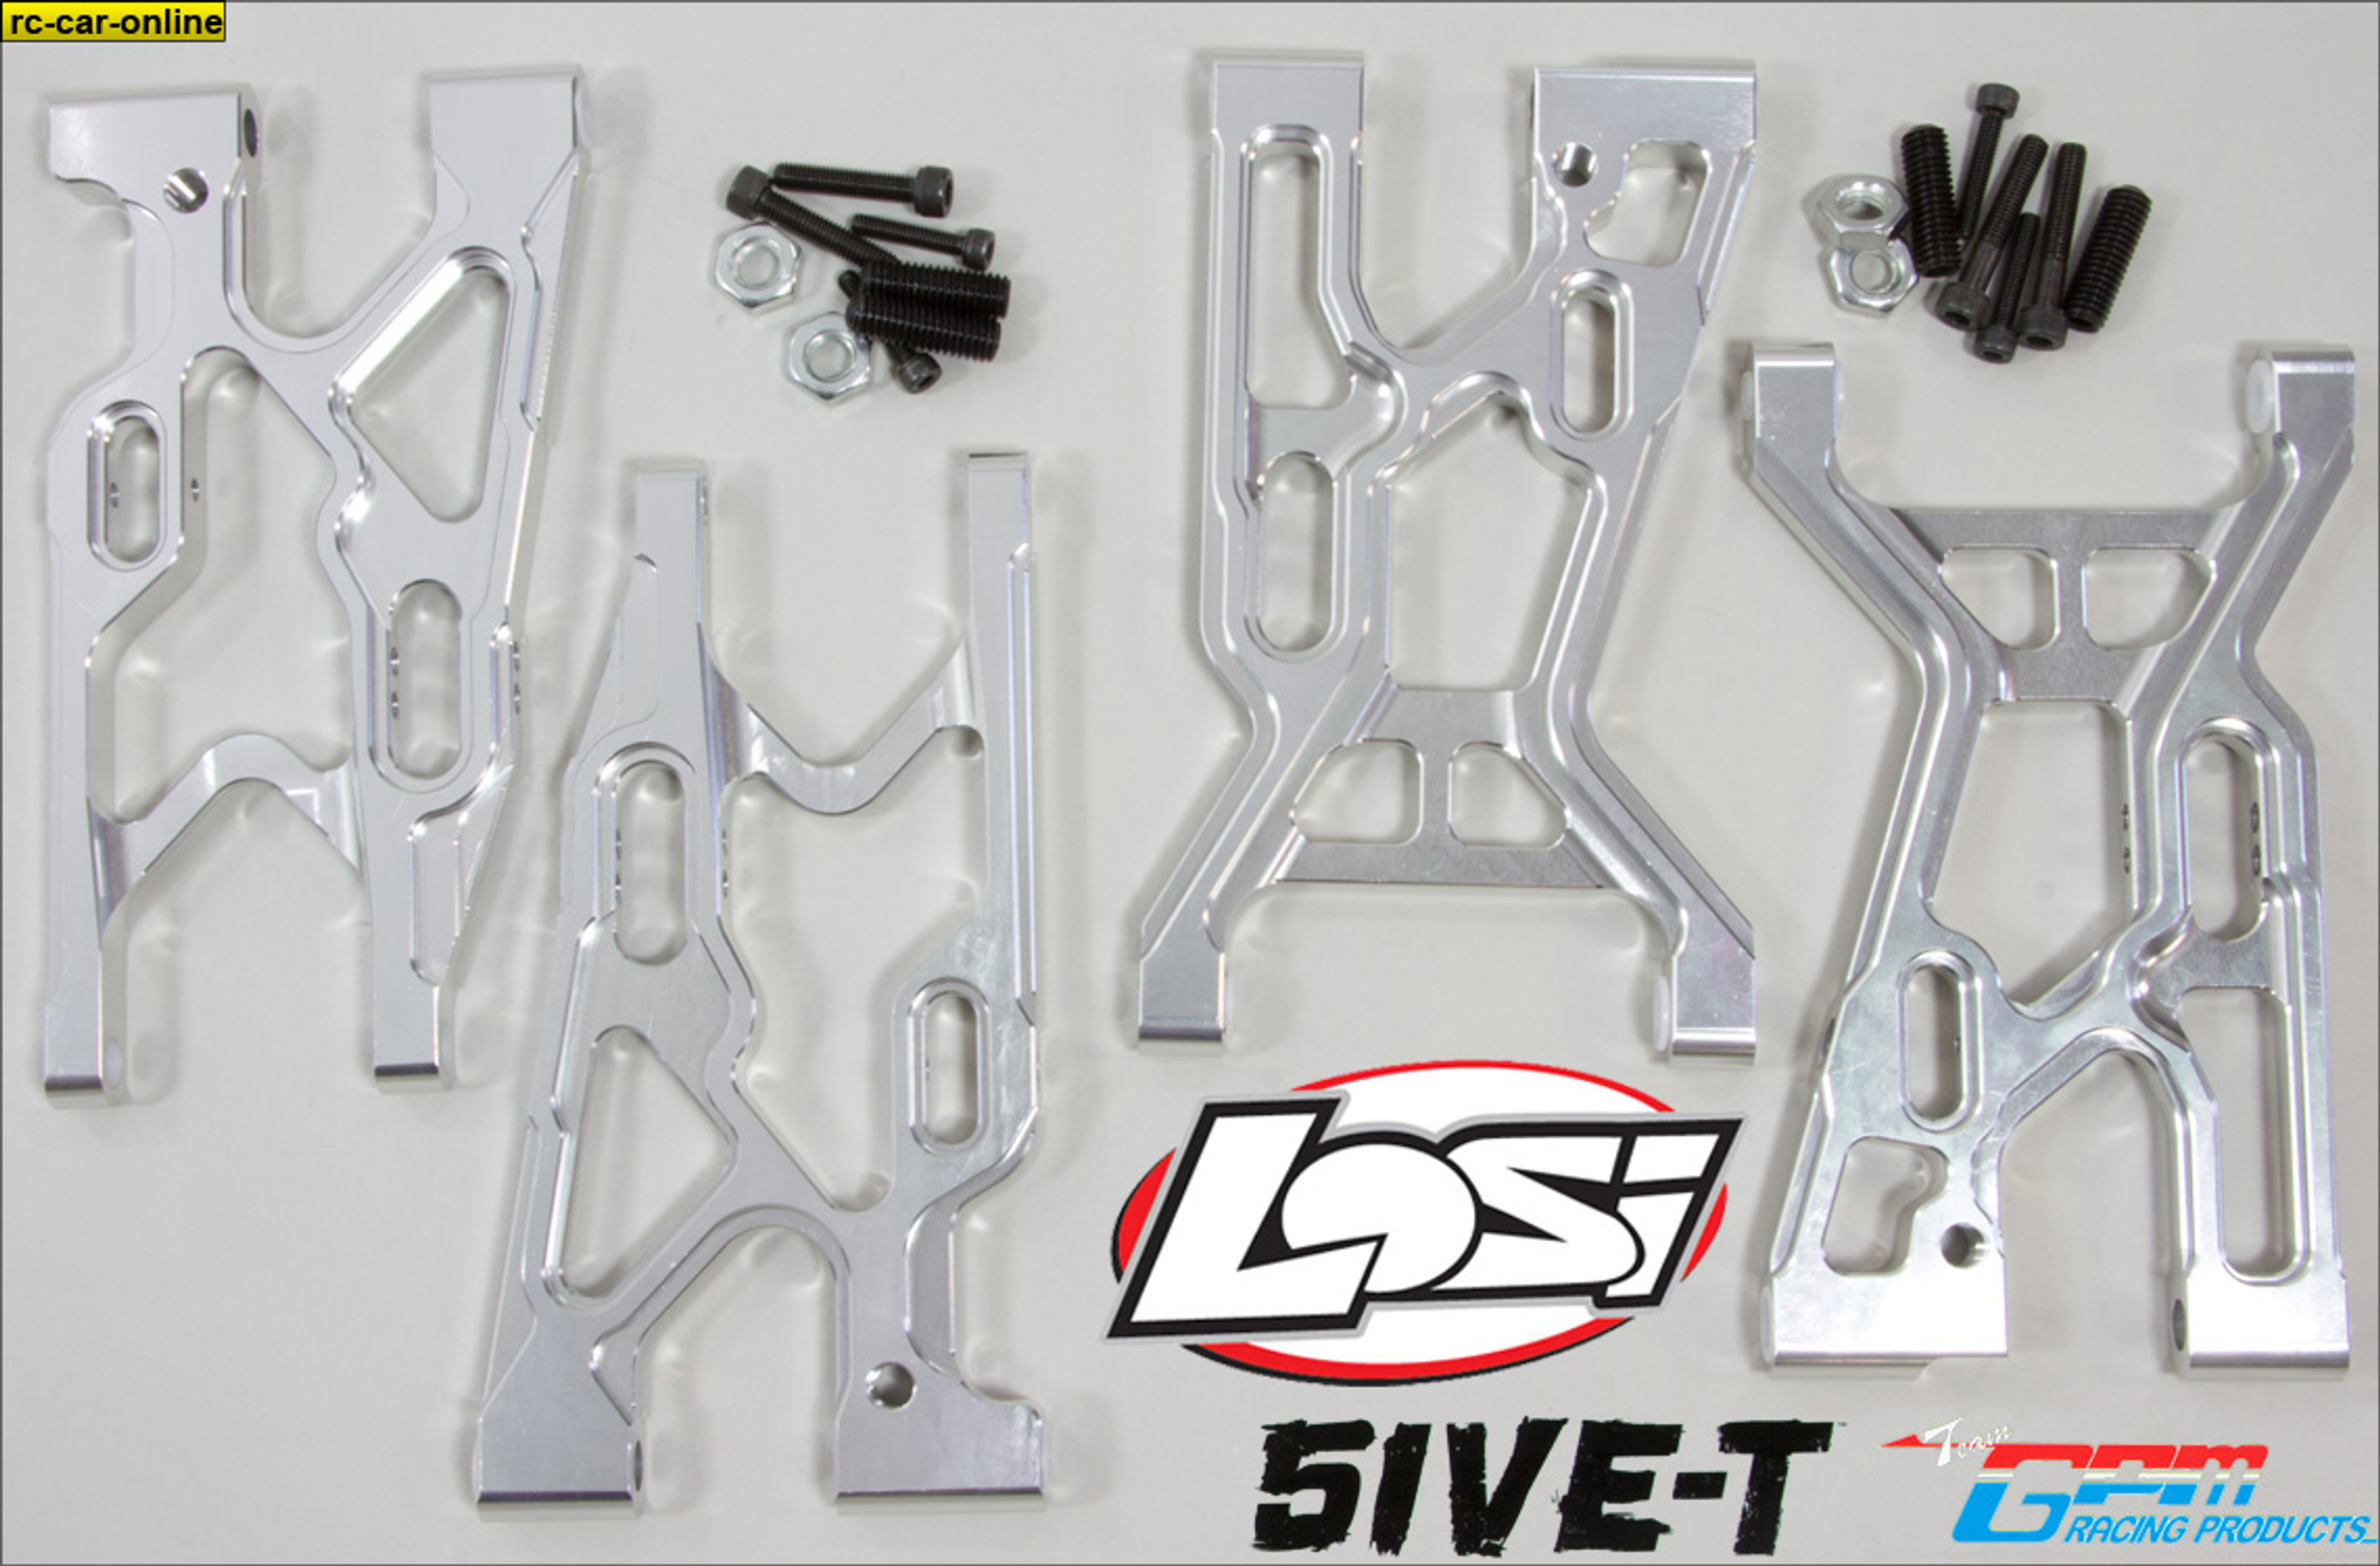 y0777/01 GPM / Losi 5ive-T a-arm set front and rear, set